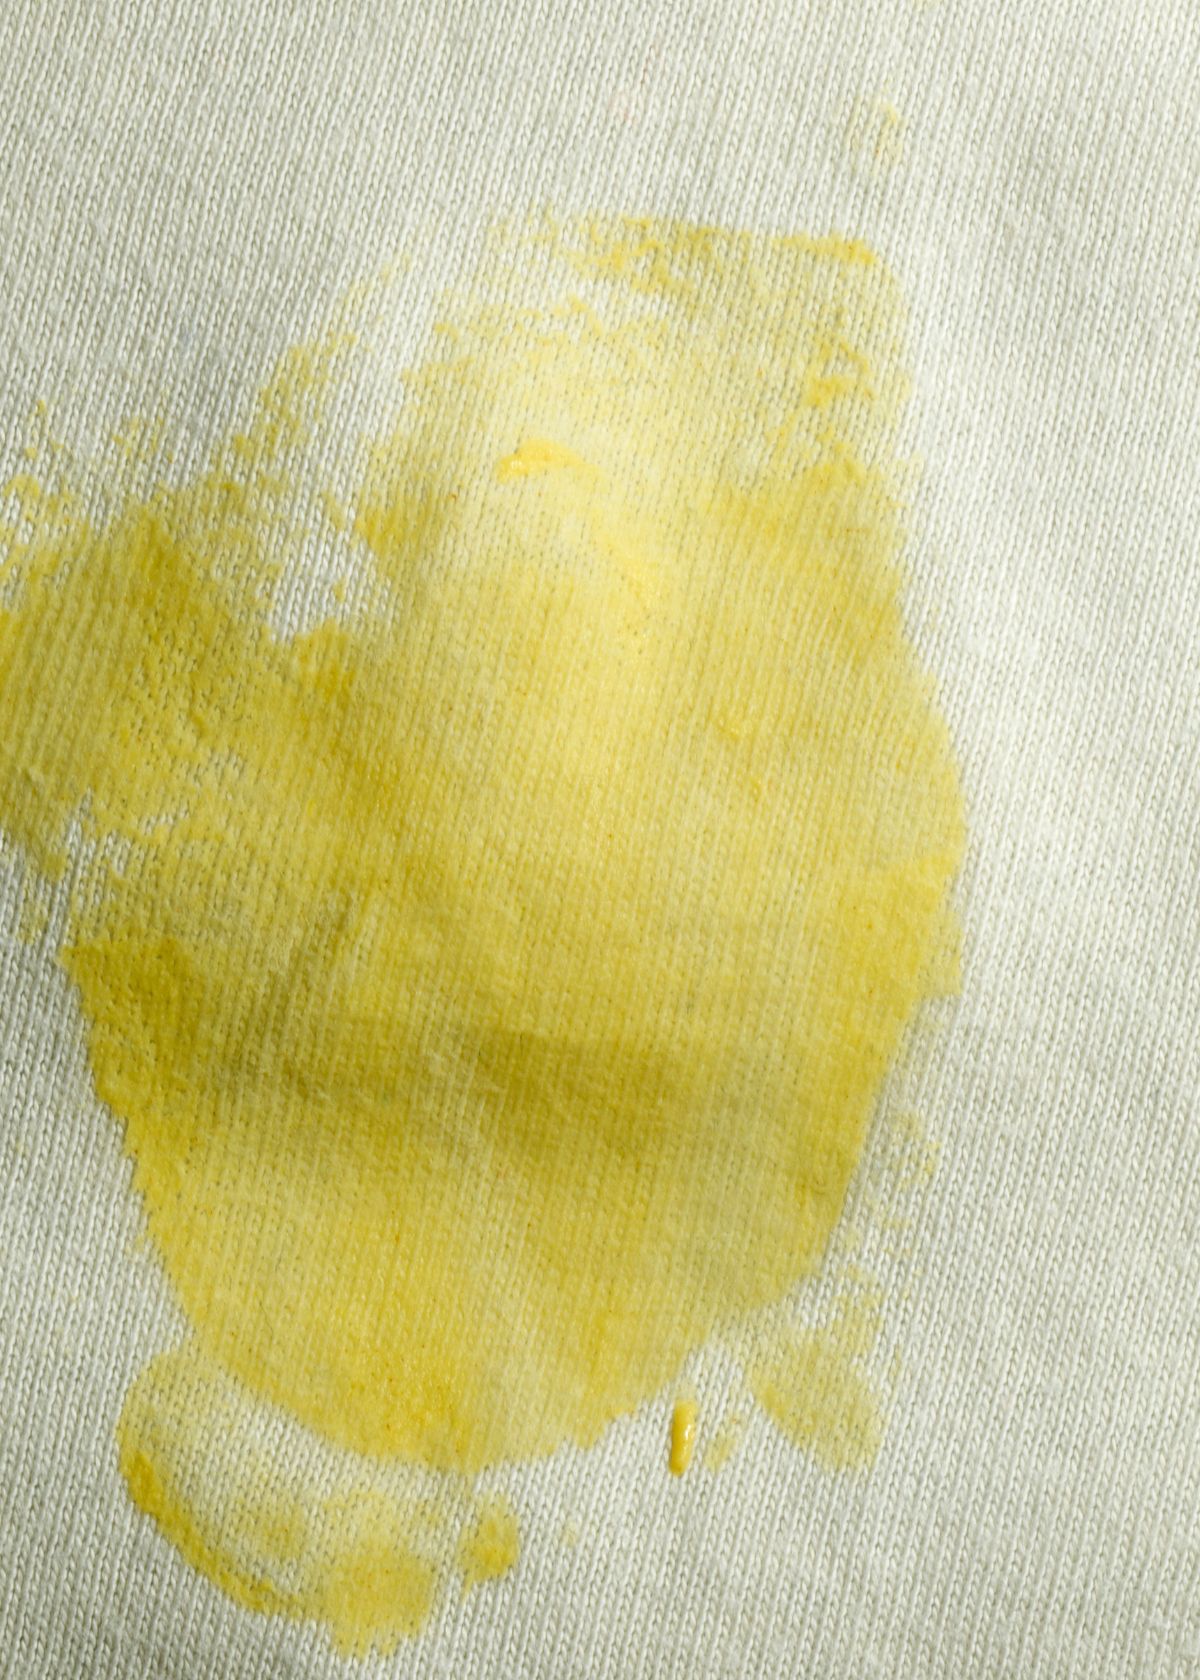 Mustard stain on white cloth - How to Get Mustard Out of Clothes